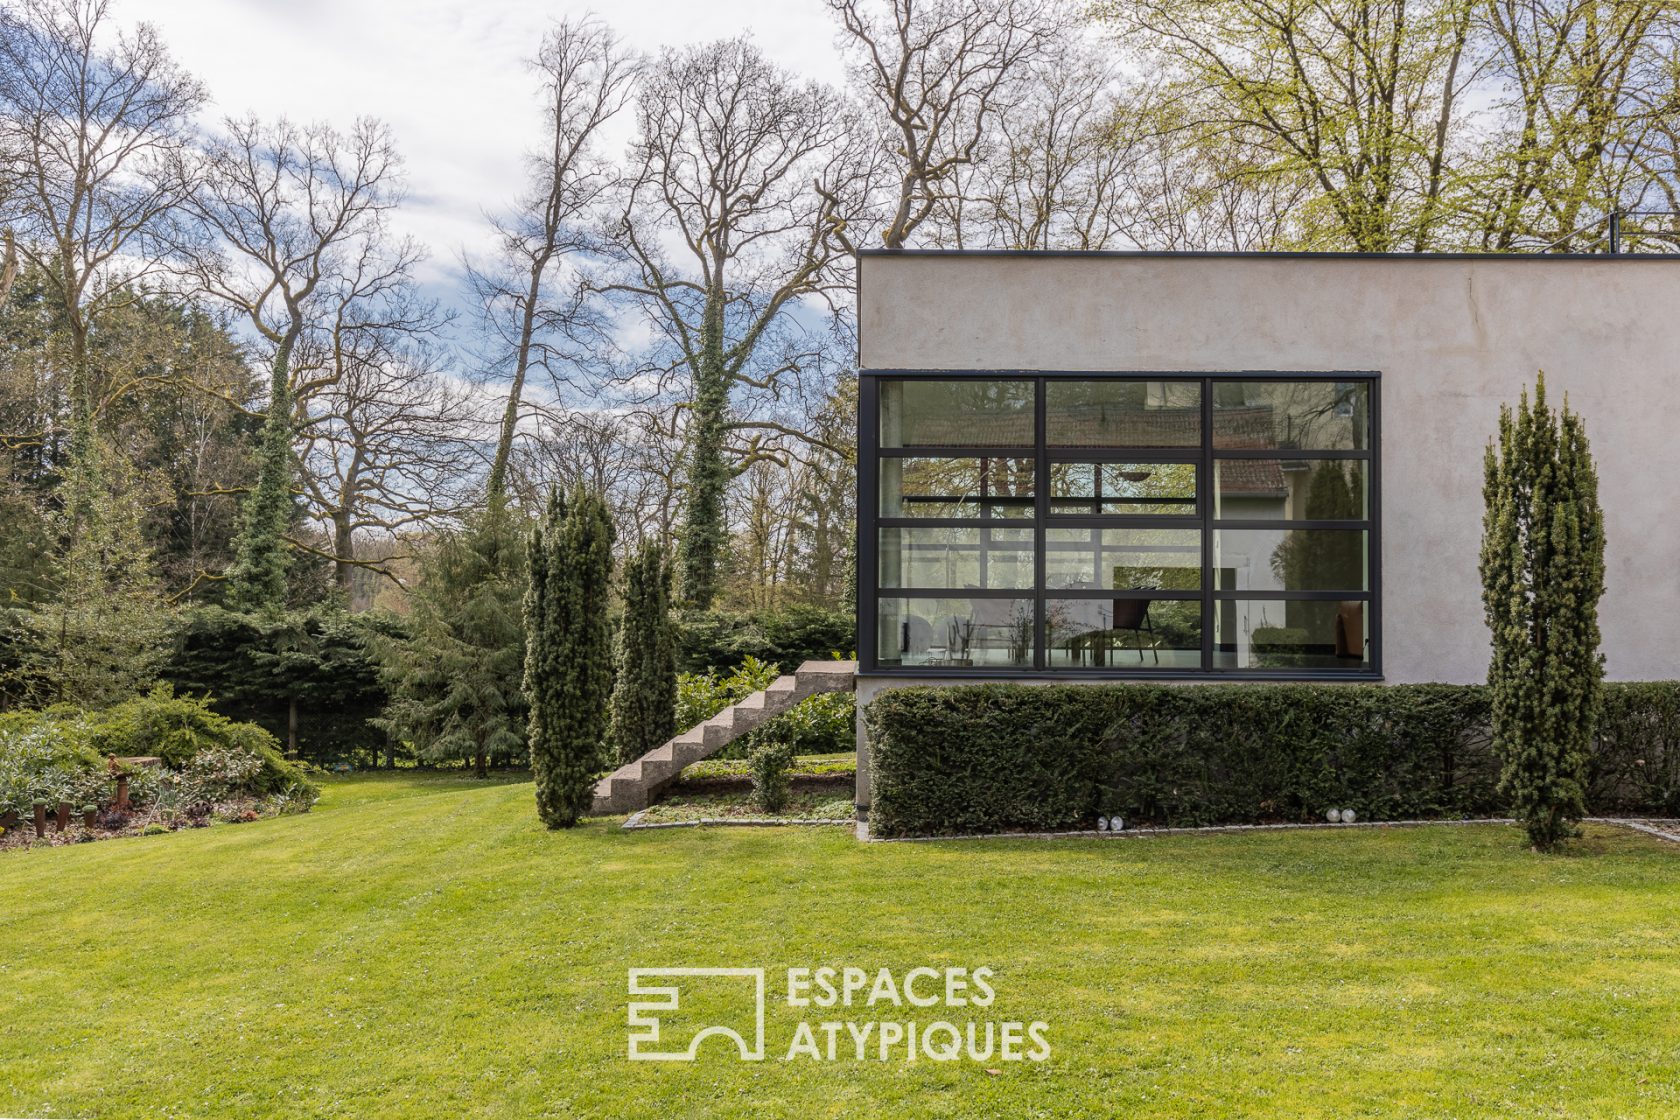 Character house and its contemporary extension in the heart of a wooded park